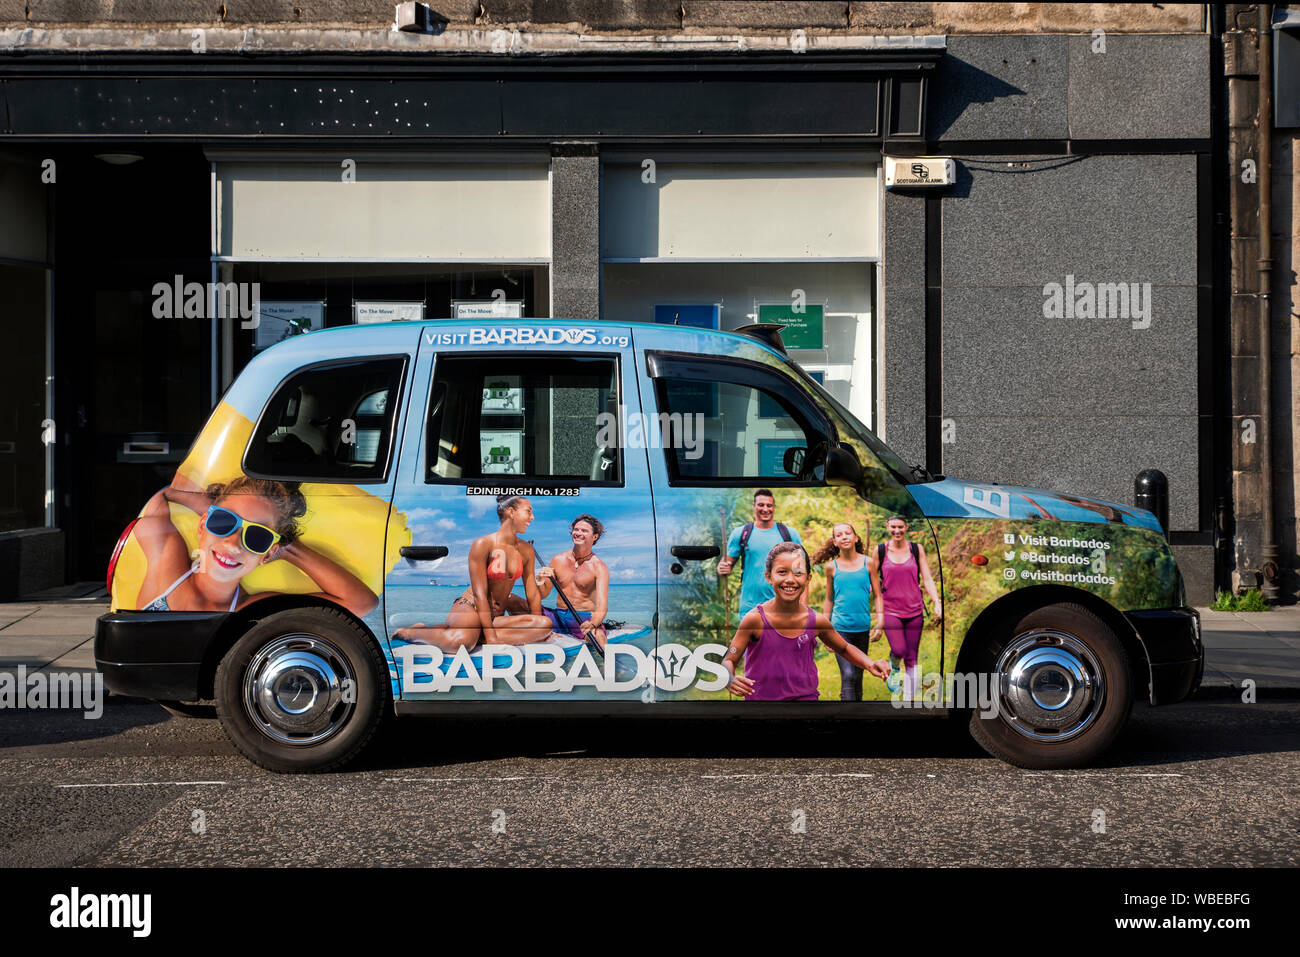 Taxi Advert High Resolution Stock Photography and Images - Alamy